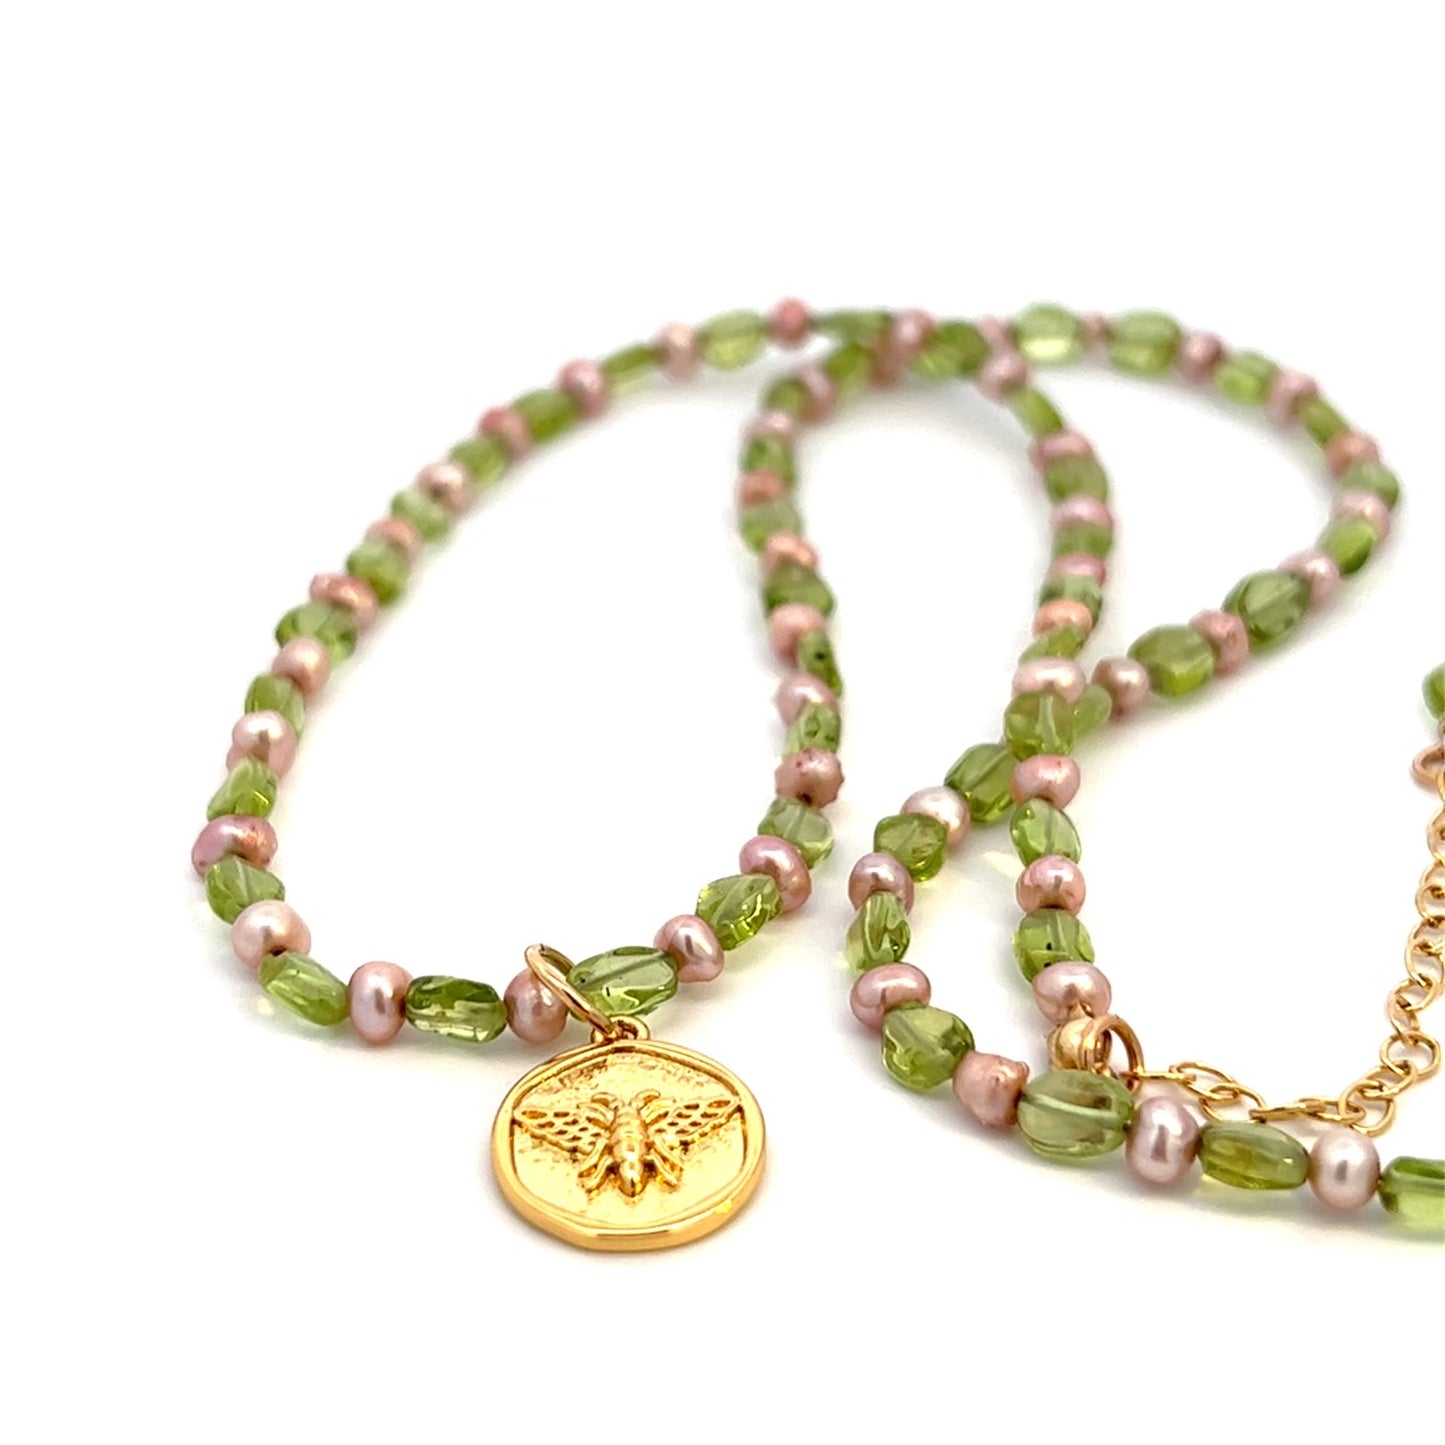 Natural Gemstone Peridot Necklace with Pearl 14k GF